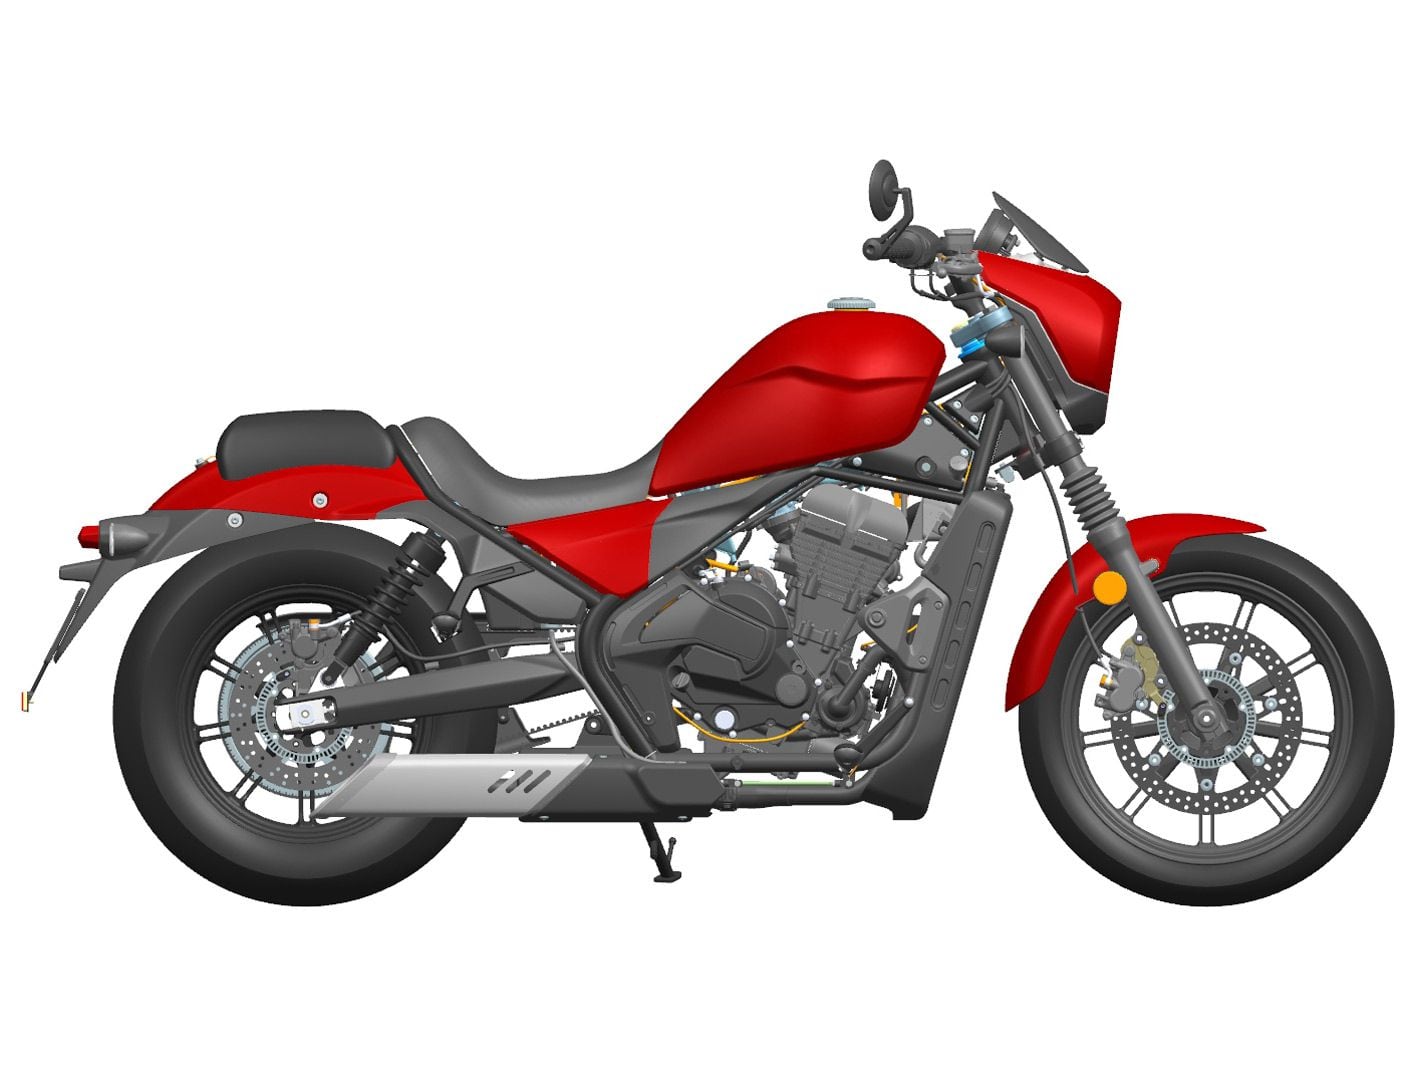 A cruiser looks like it will join Moto Morini’s lineup in the near future.